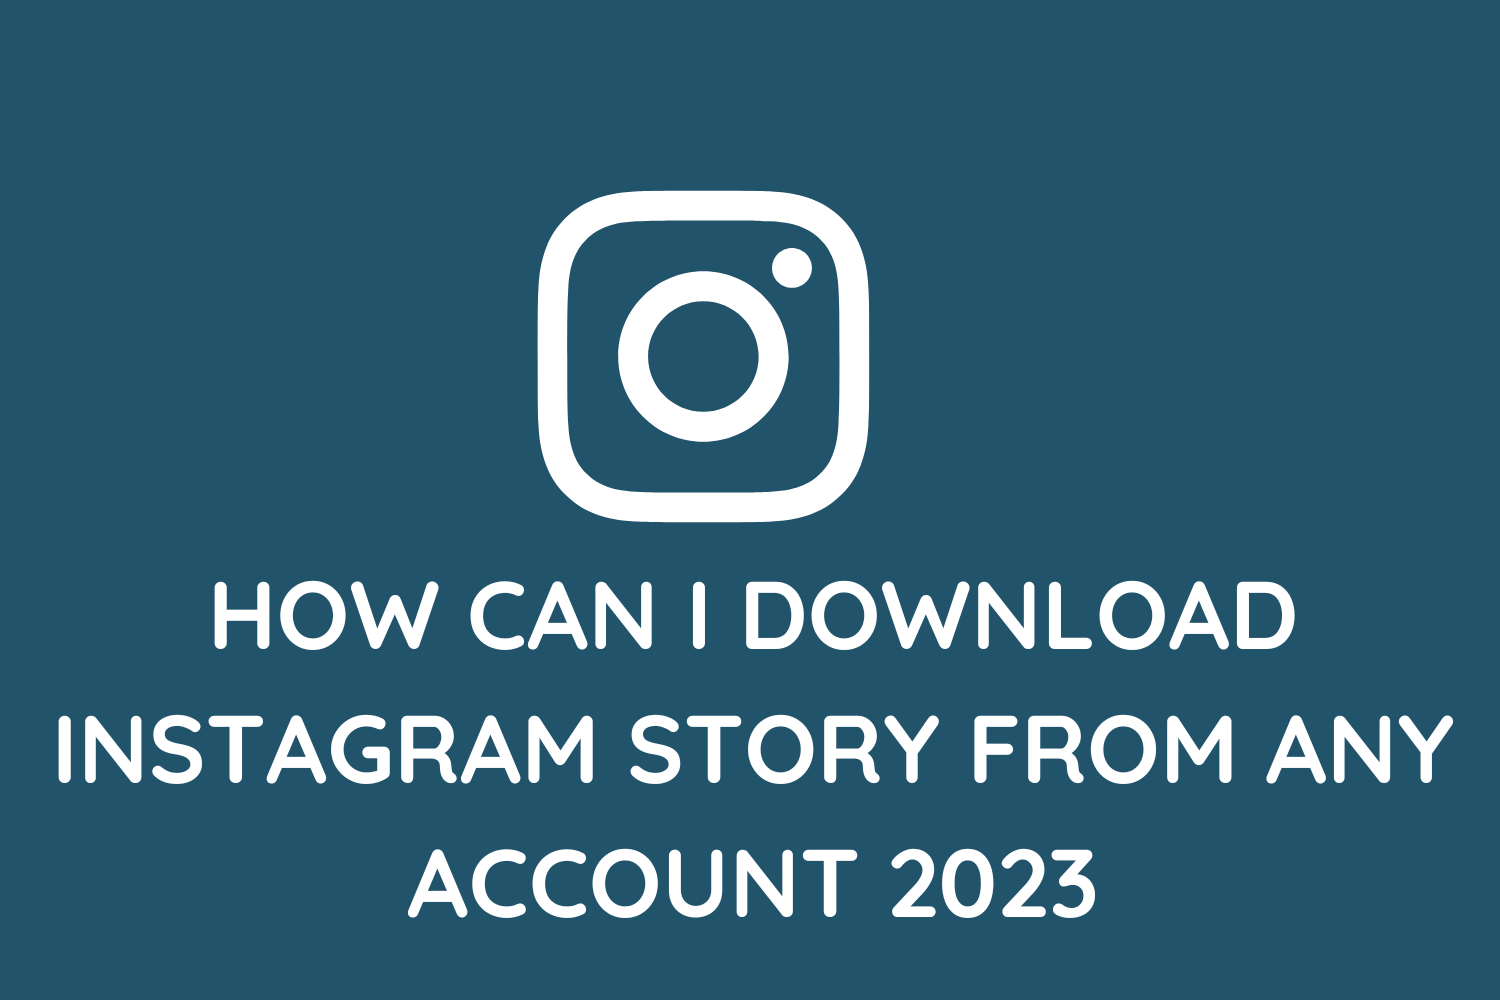 How Can I Download Instagram Story From Any Account 2023